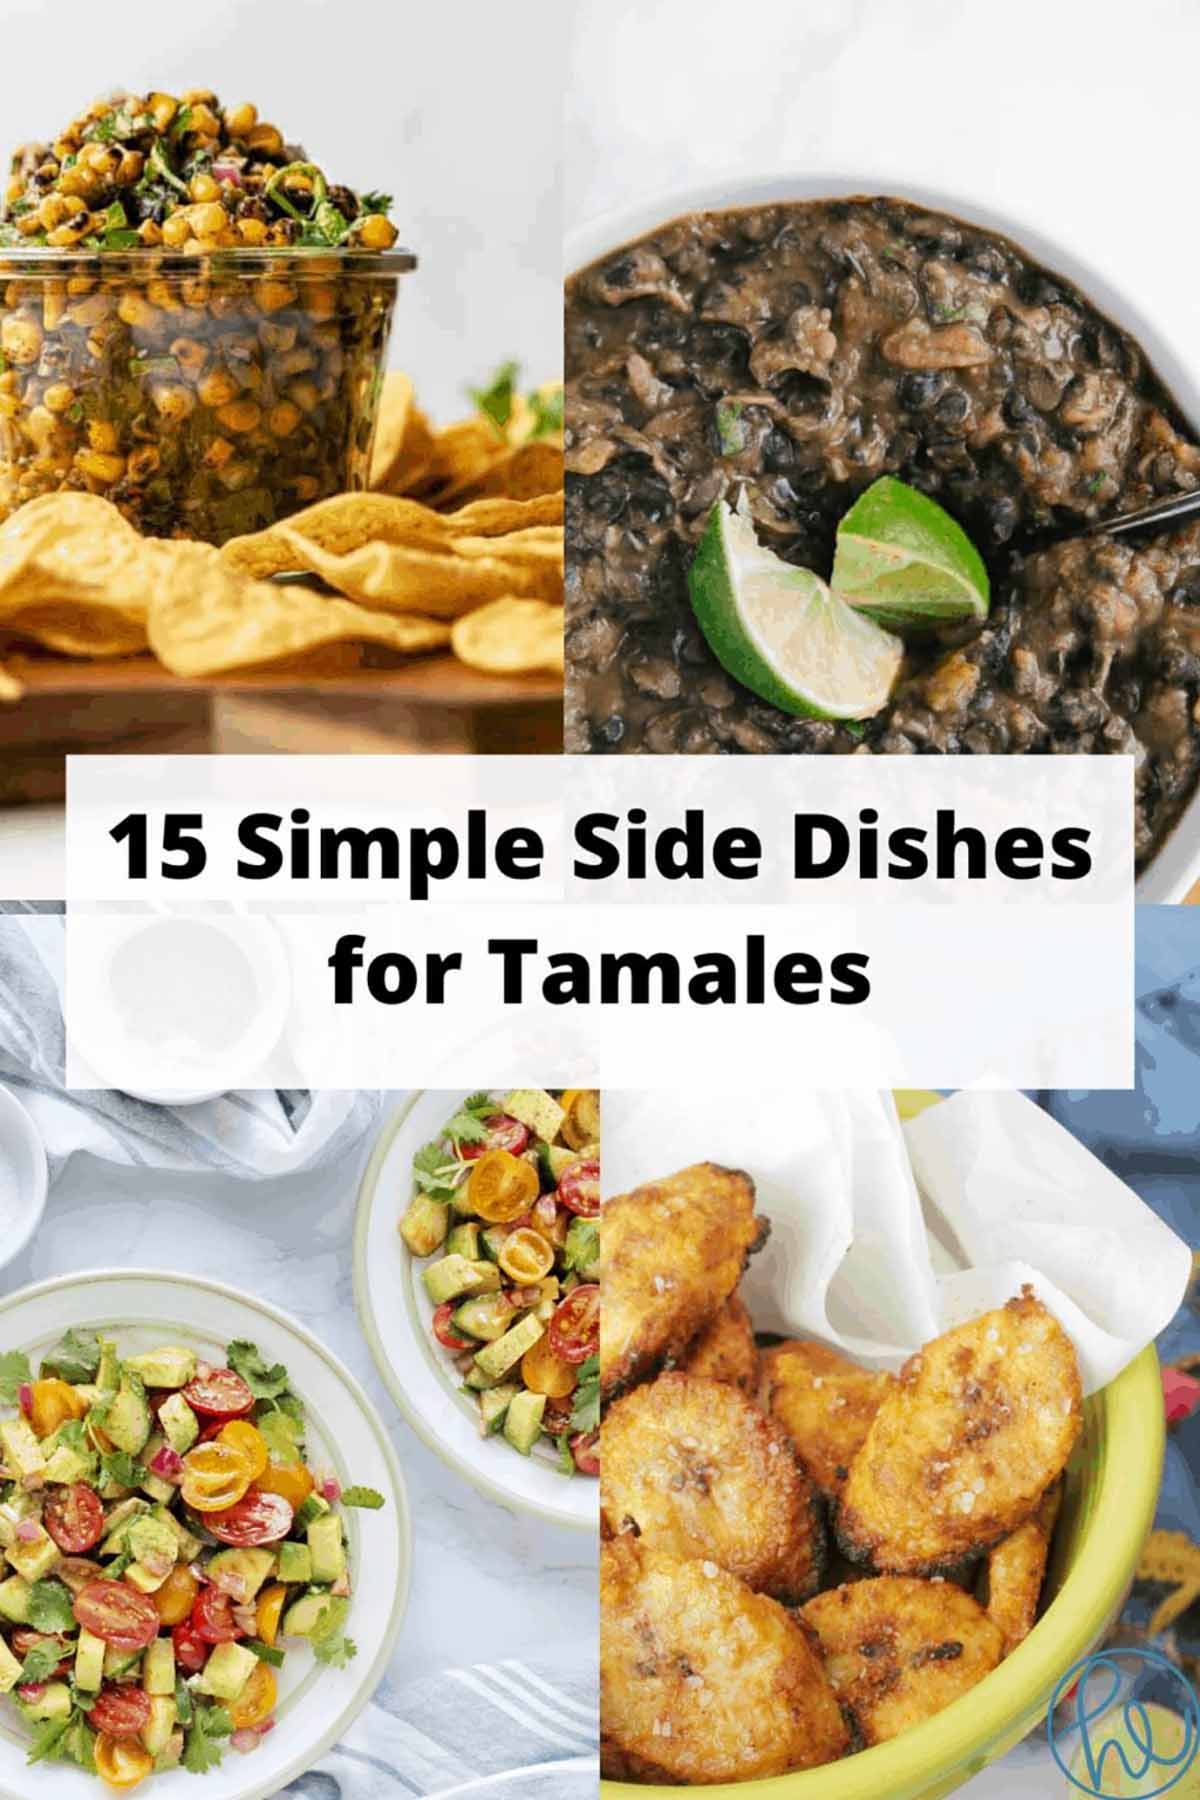 4 pictures of tamale side dishes.